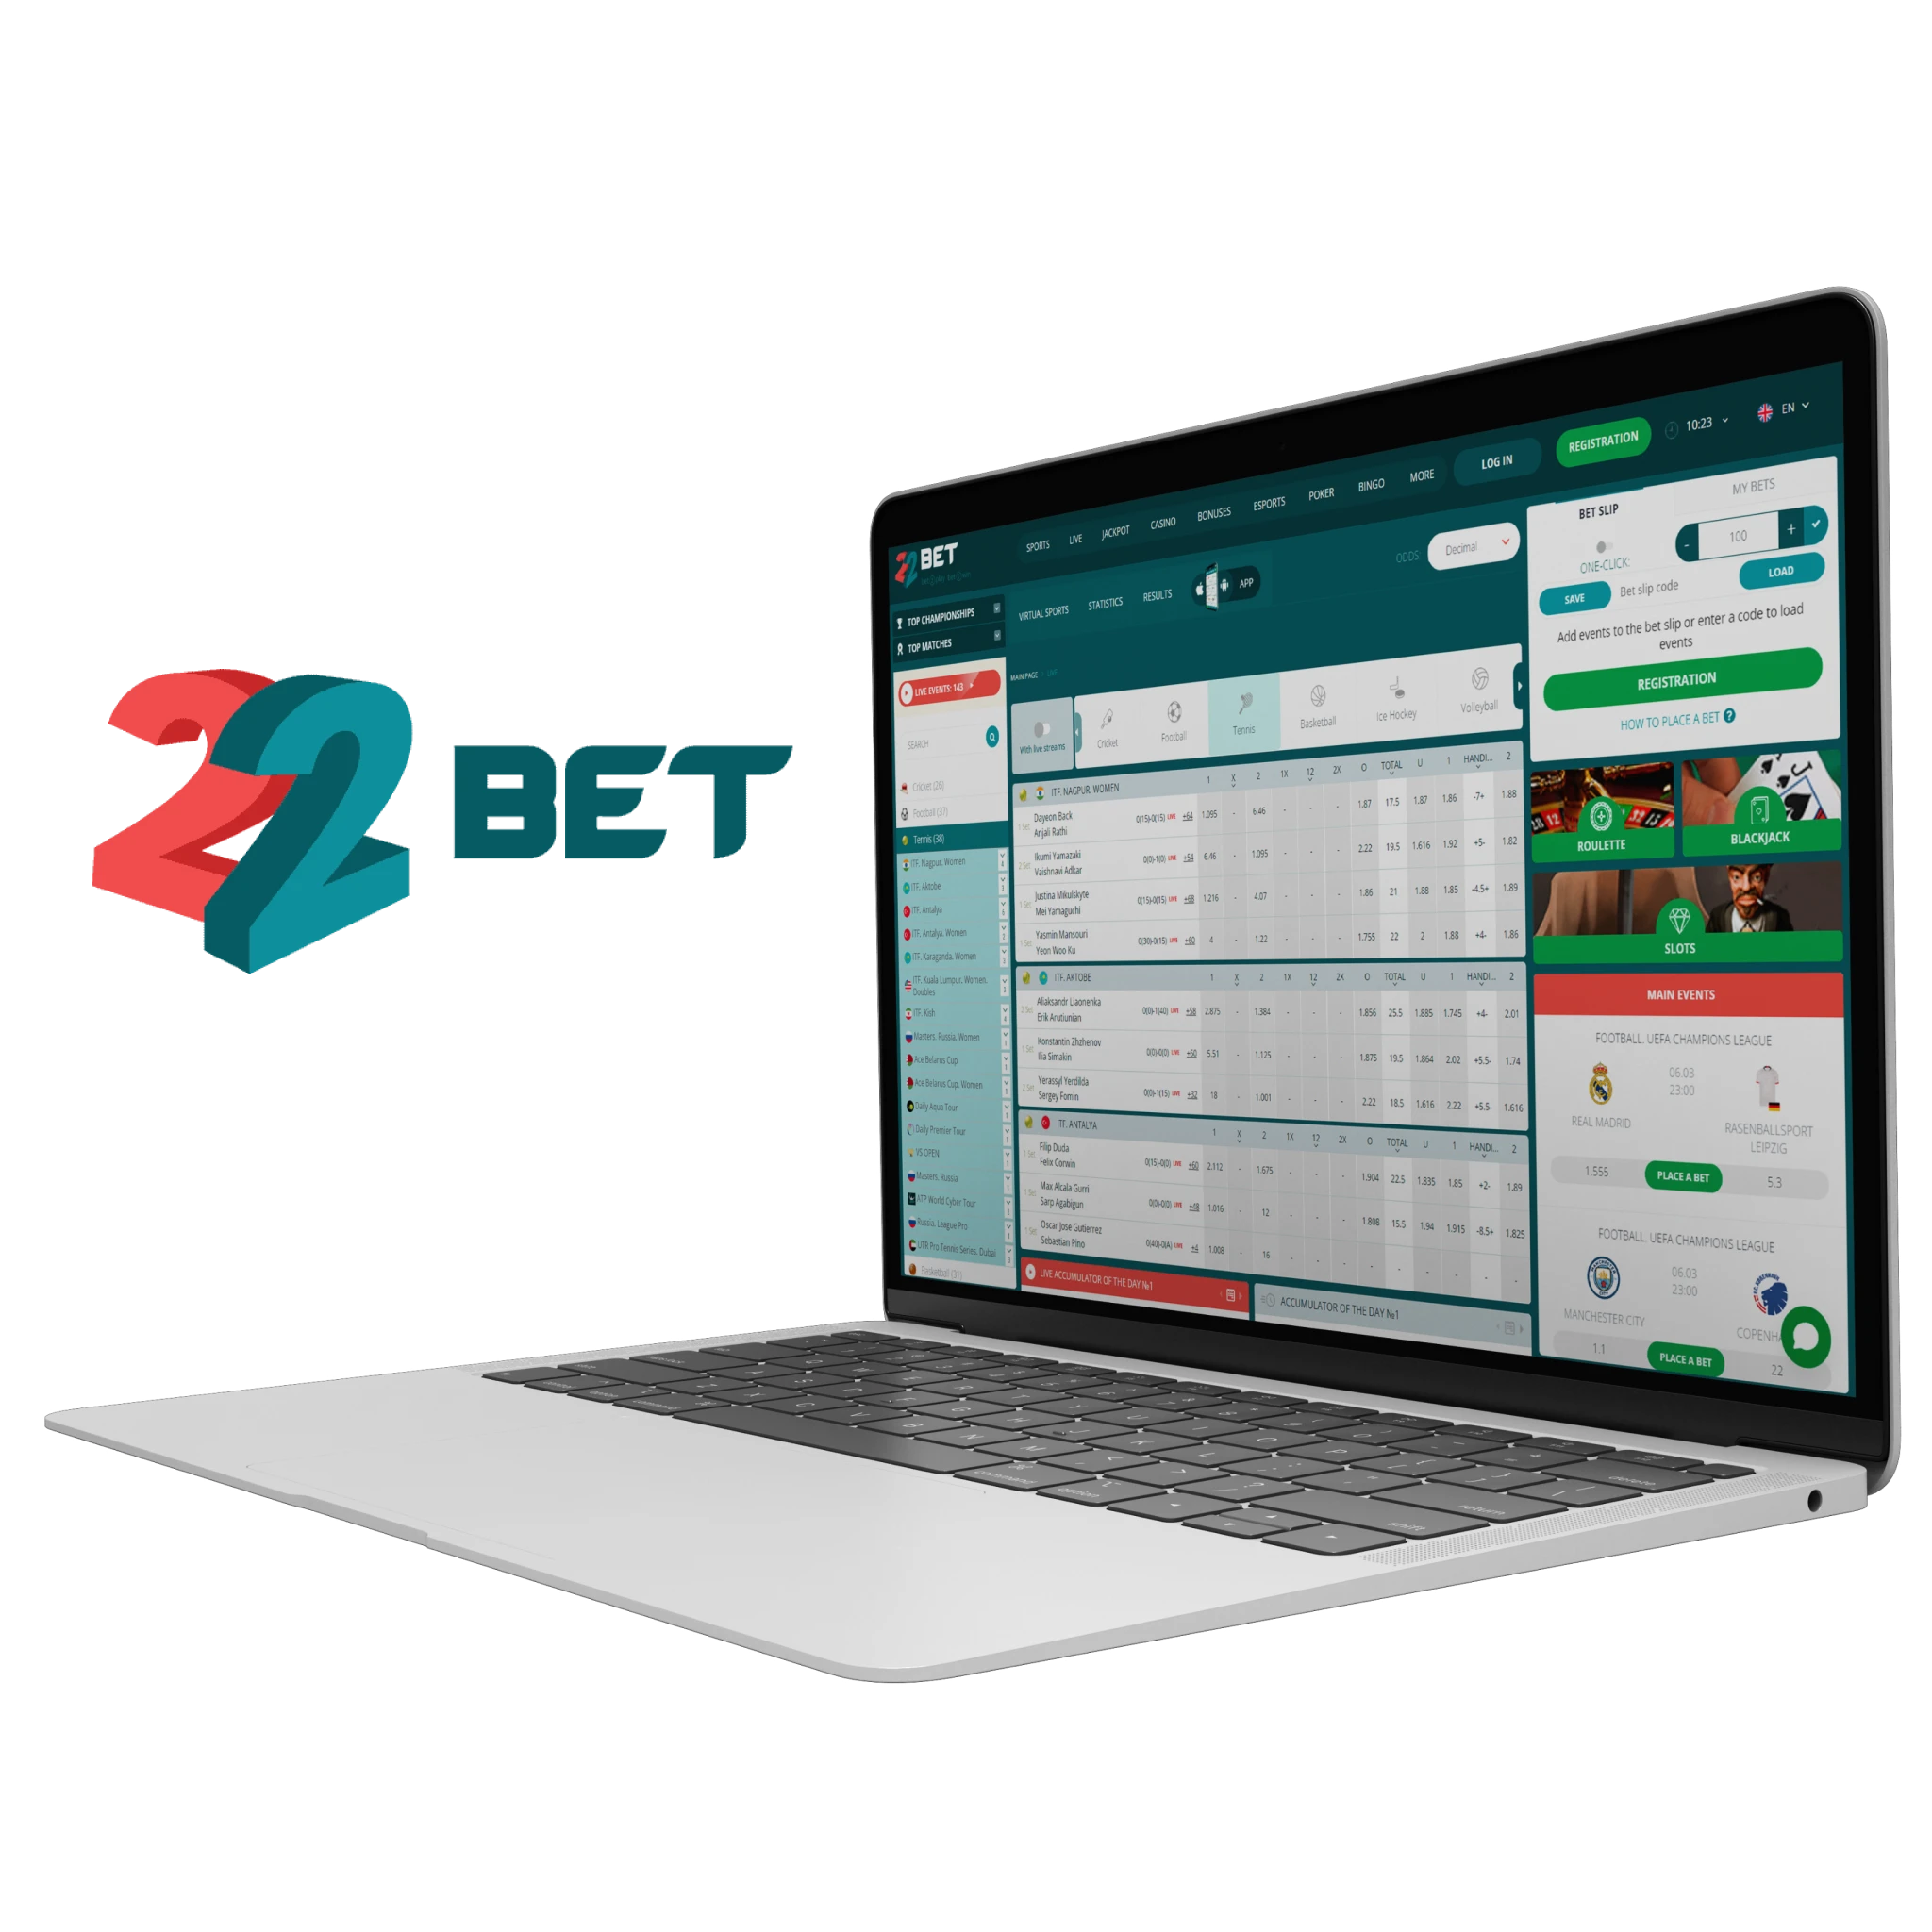 22bet is known for its high-quality service in chess betting.